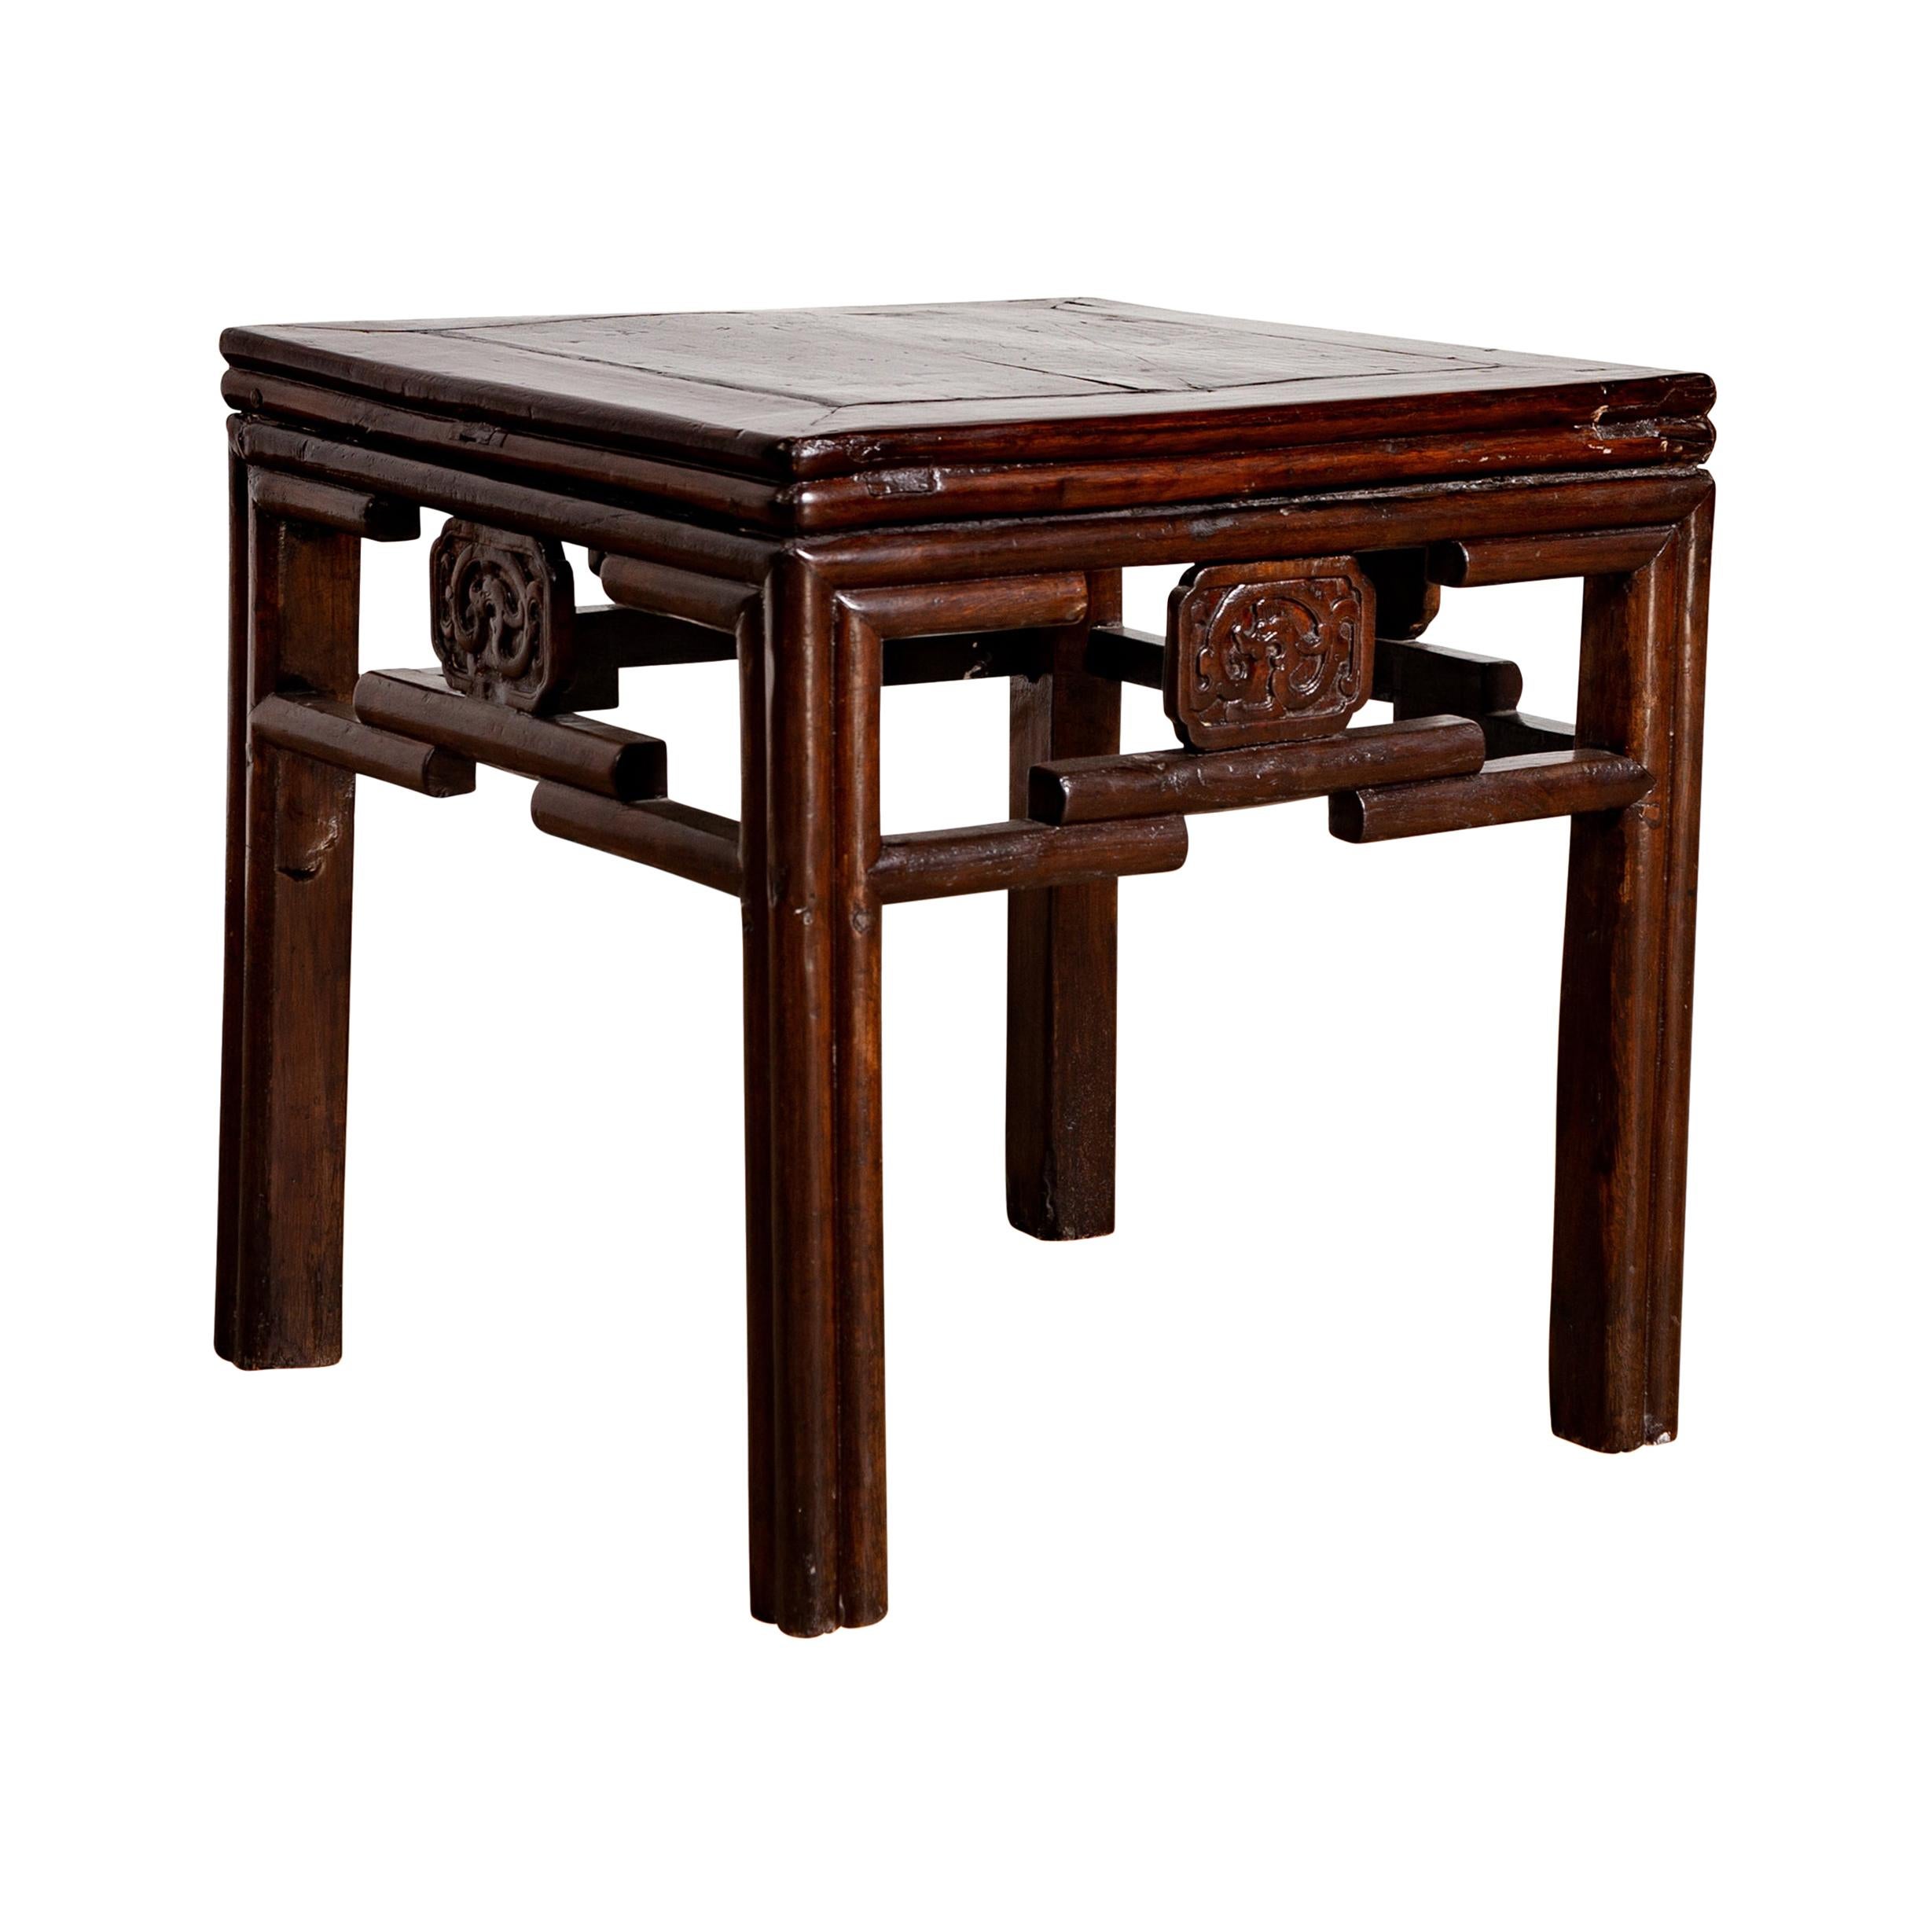 Vintage Qing Dynasty Style Side Table with Dark Patina and Carved Medallions